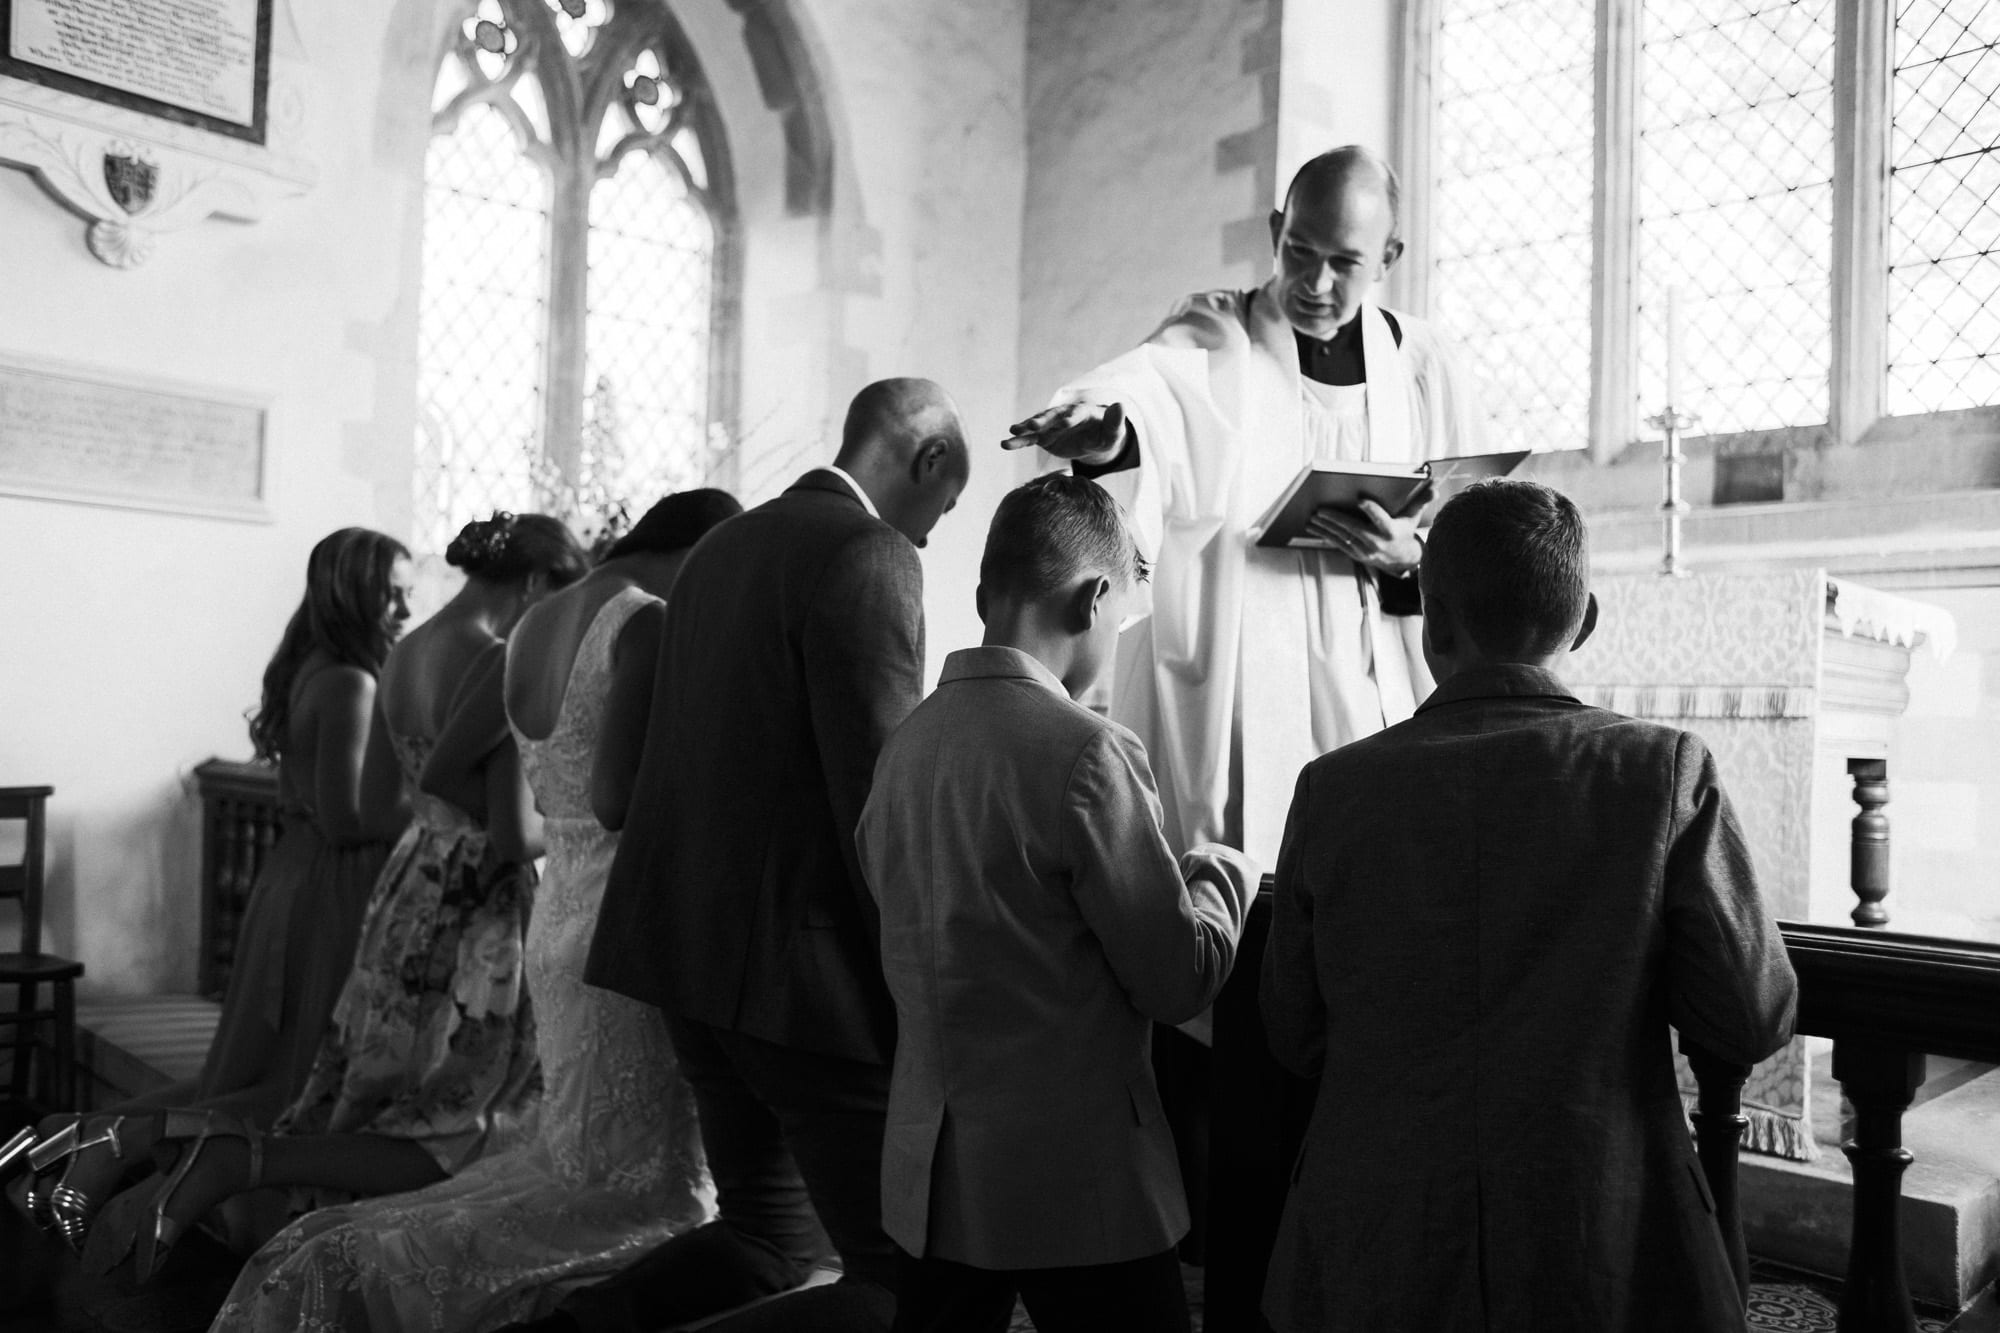 vicar gives blessing to the family